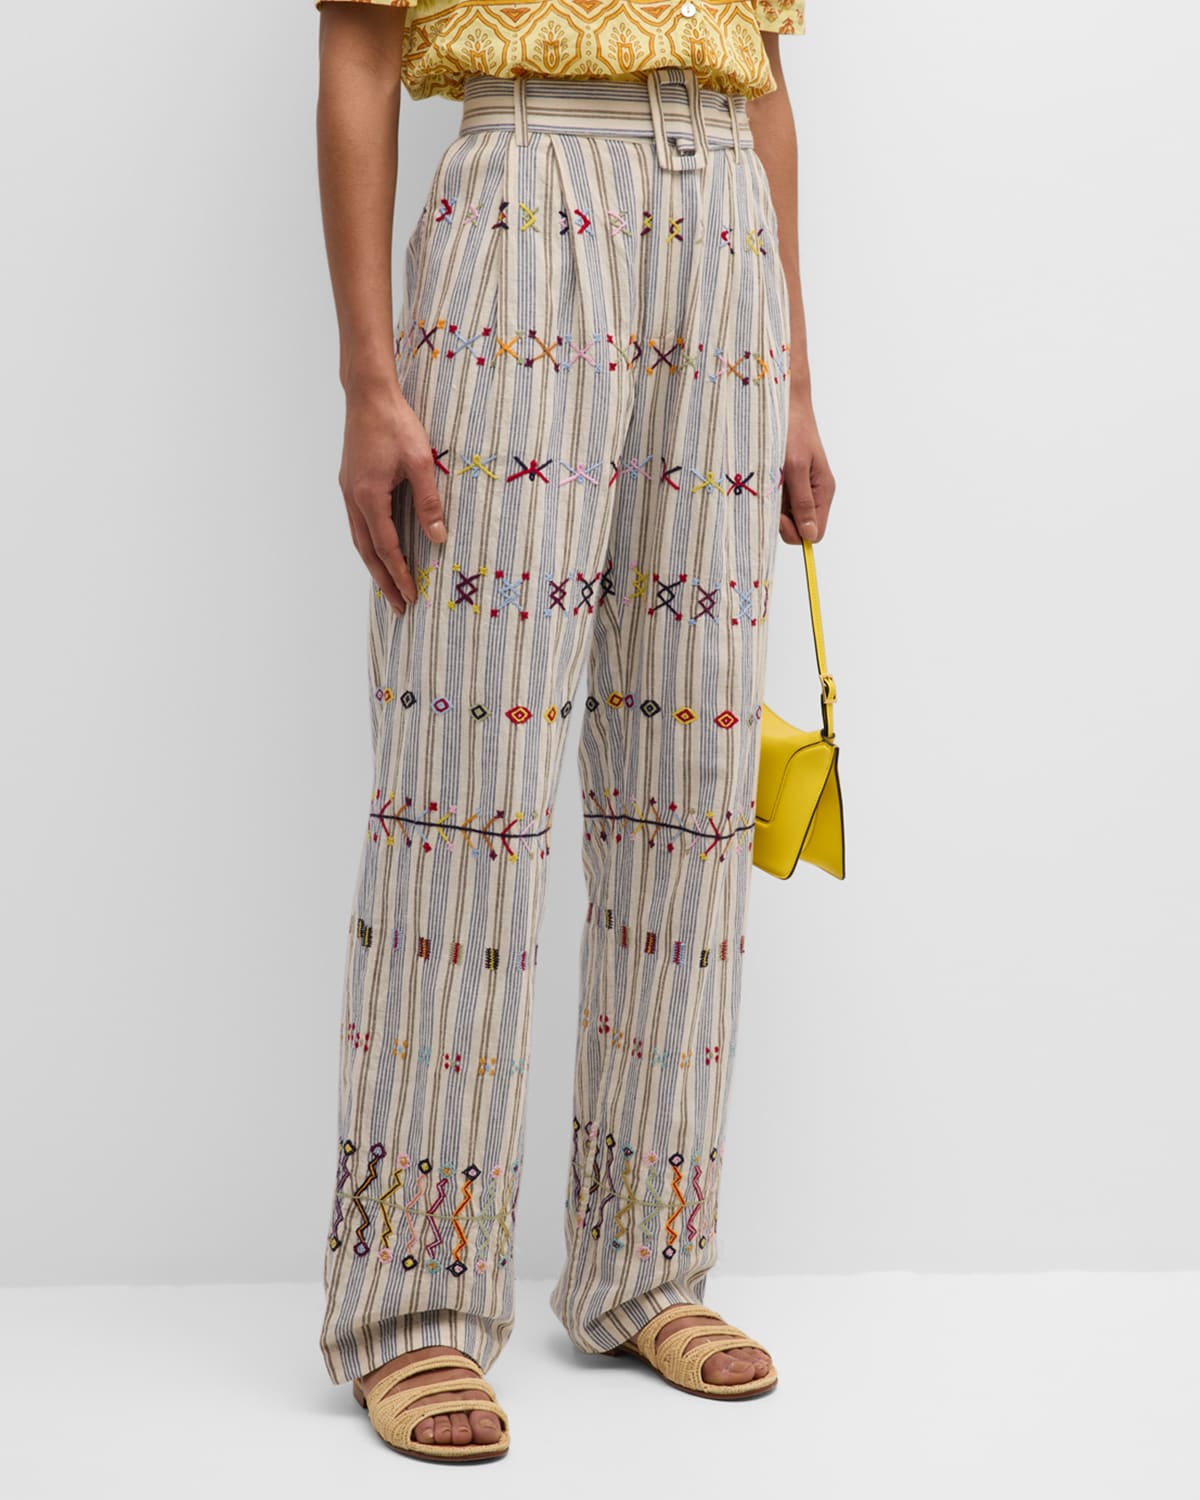 Colette Arrow Stripe Embroidered Pants with Belt